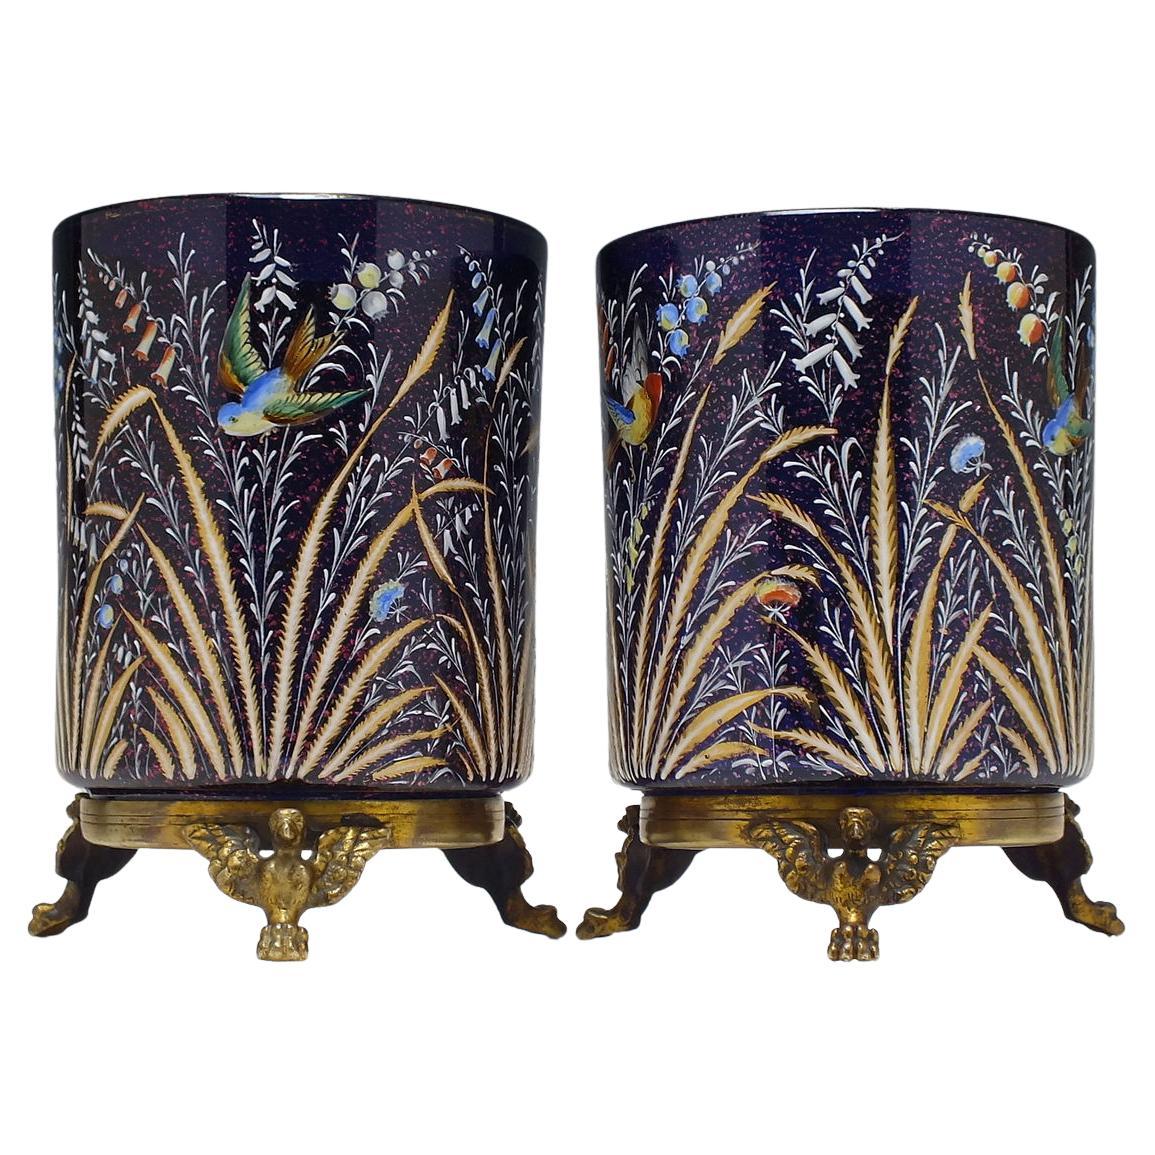 Pair of Museum Quality Moser Polychromatic Enamelled 19th Century Vases c1890